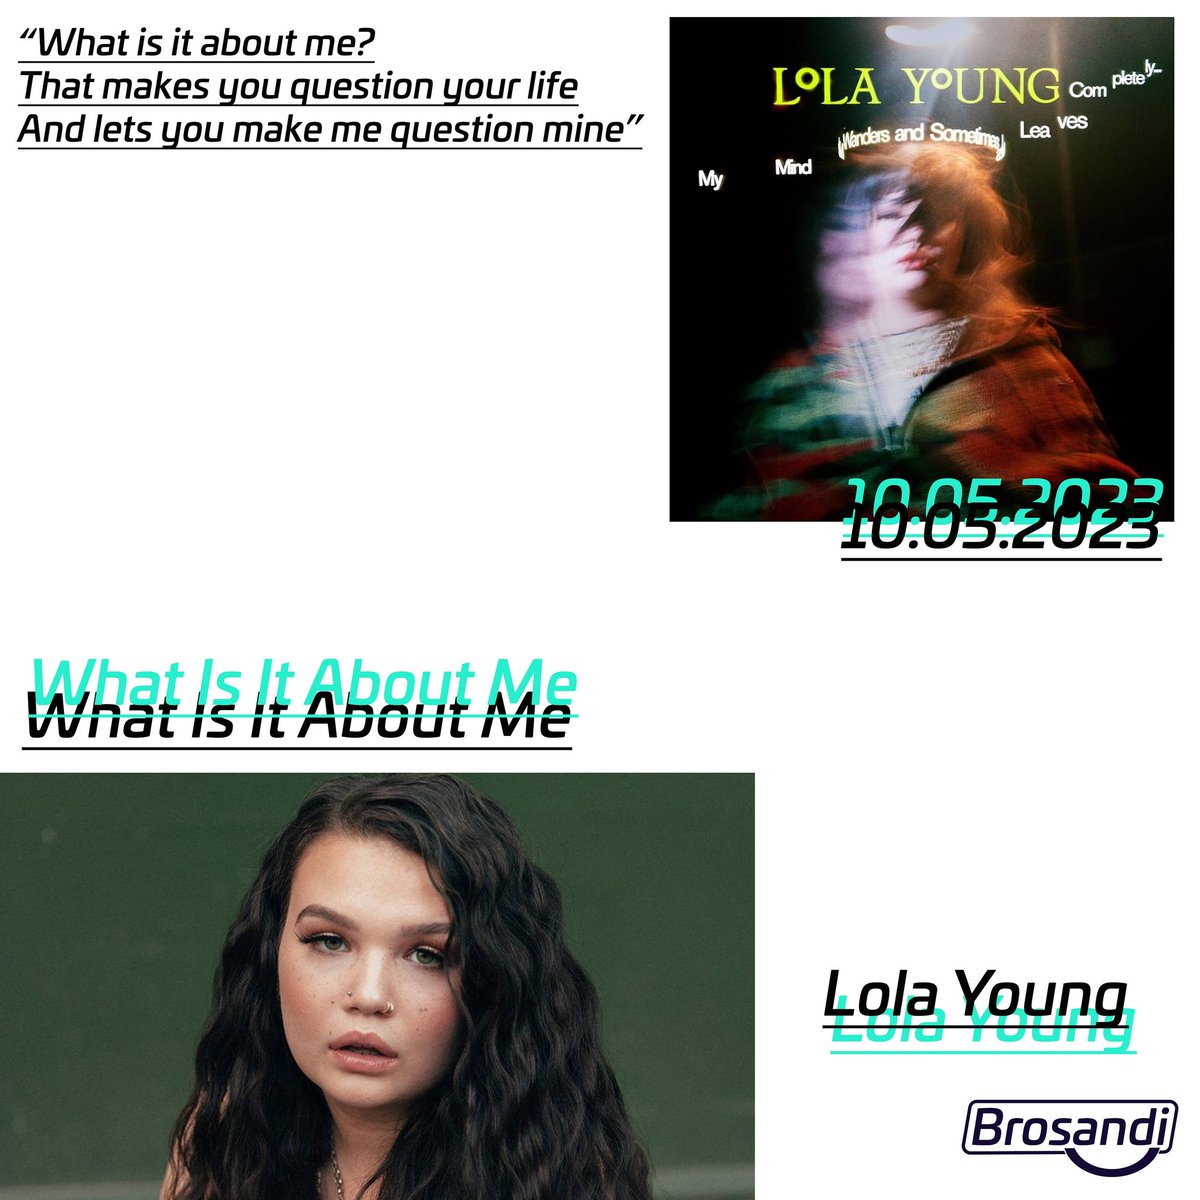 Lola Young hasn't put out a bad song yet and this one is no exception. The 'Money' EP is a must listen. 
.
#whatisitaboutme #lolayoung #newmusic #daily #musicblog #brosandi #norwich